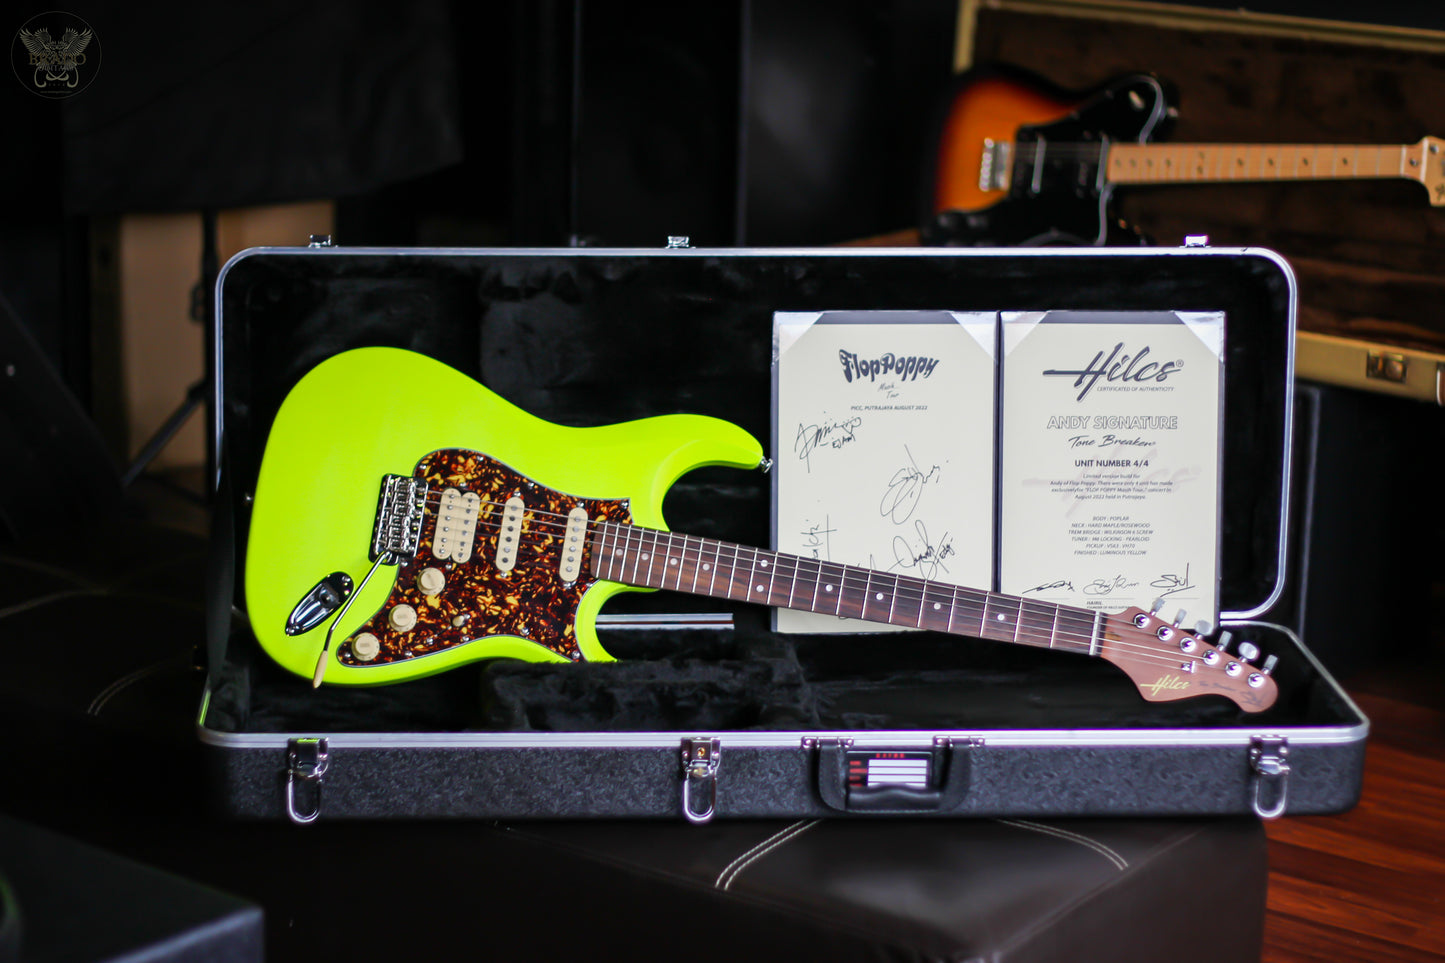 **RARE** HILCS LIMITED EDITION ANDY FLOP POPPY SIGNATURE TONE BREAKER #4 LUMINOUS YELLOW w HARDCASE HANDCRAFTED IN MALAYSIA (NEW)